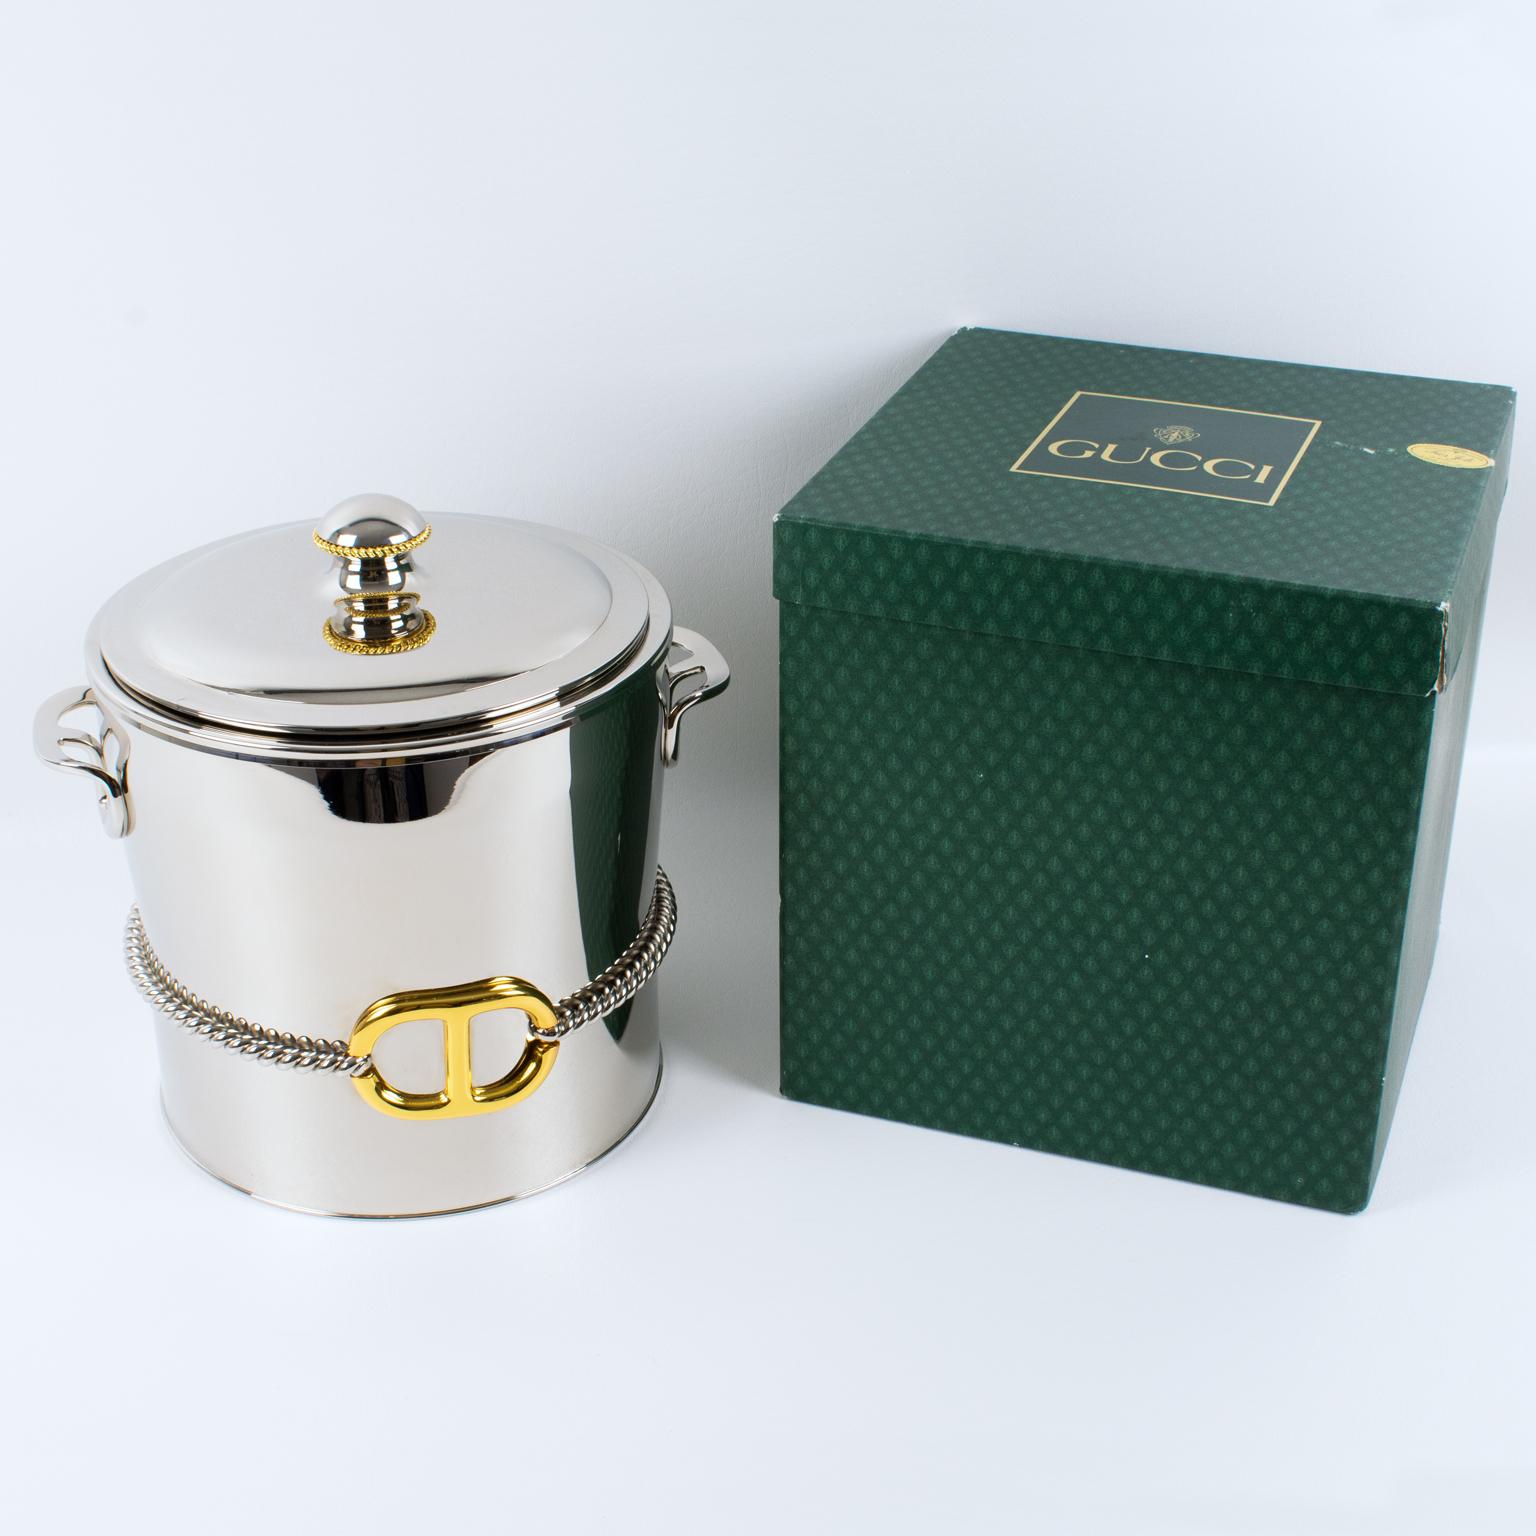 Gucci, Italy, crafted this luxury gold-plated and silvered metal barware ice bucket in the 1980s. This bar accessory has a sleek and modernist design. It is made from silvered metal with stylized GG handles and 24K gold plated Gucci GG logo decor